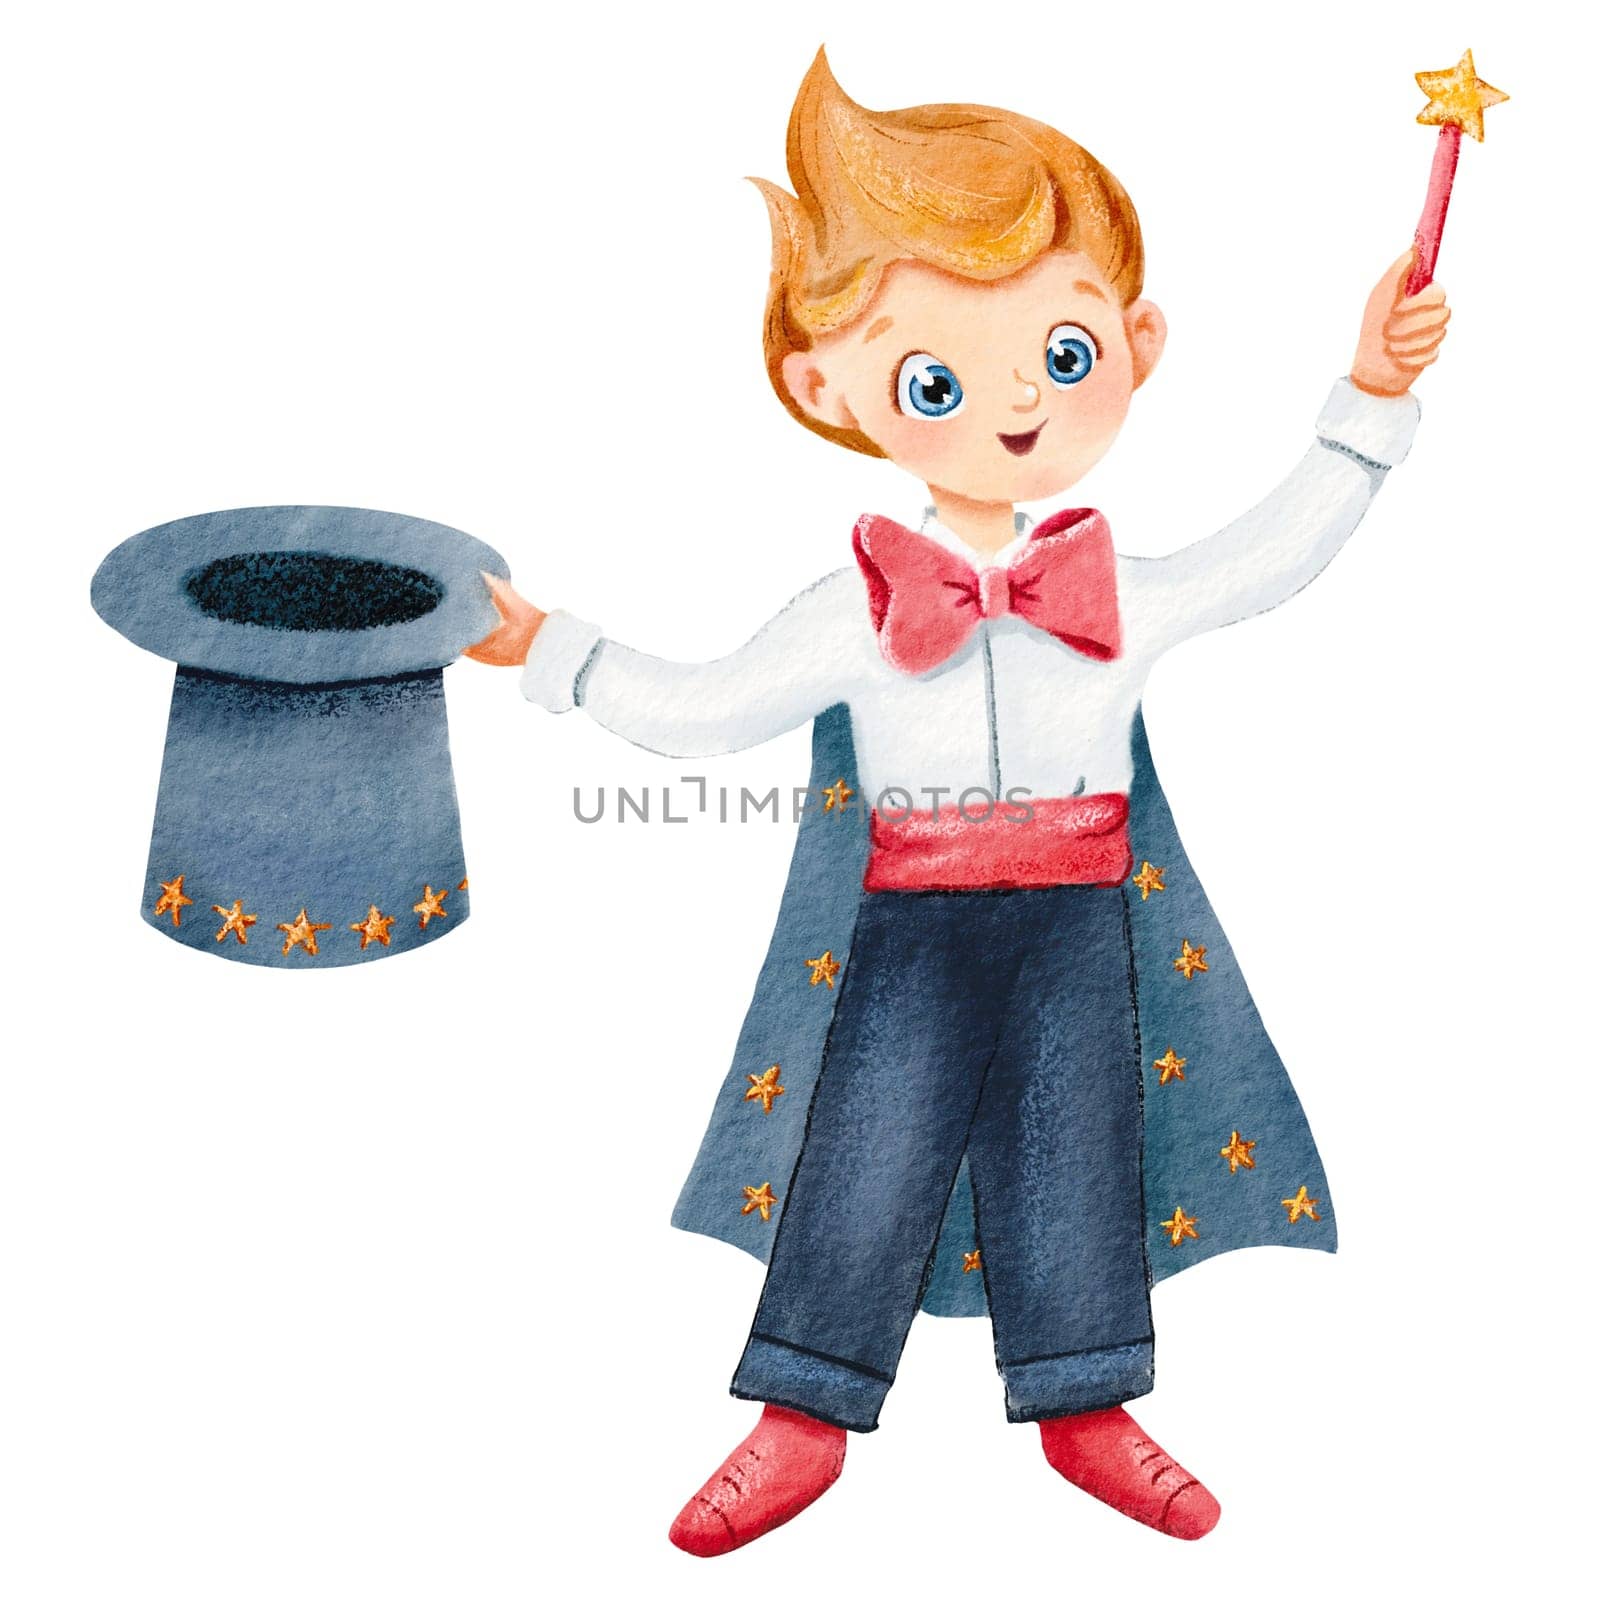 Naughty little magician. Young wizard in tailcoat, with top hat and a magic wand. Performance begins. Watercolor isolated illustration. Diversity Character for posters, postcards party invitations,.